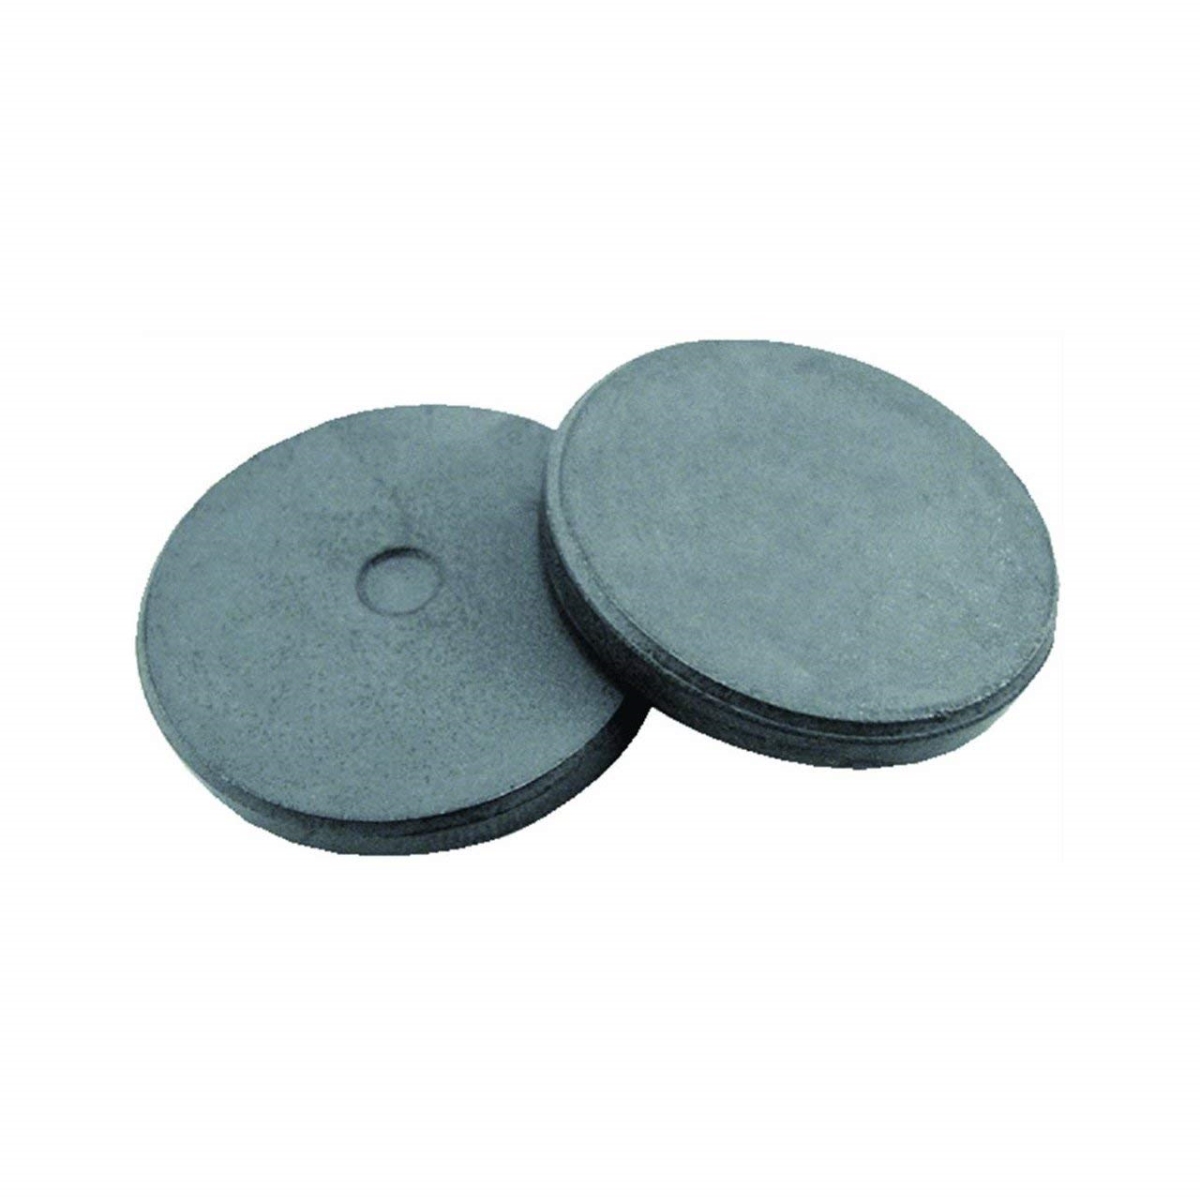 1.5 In. Magnet Disc, 2 Count